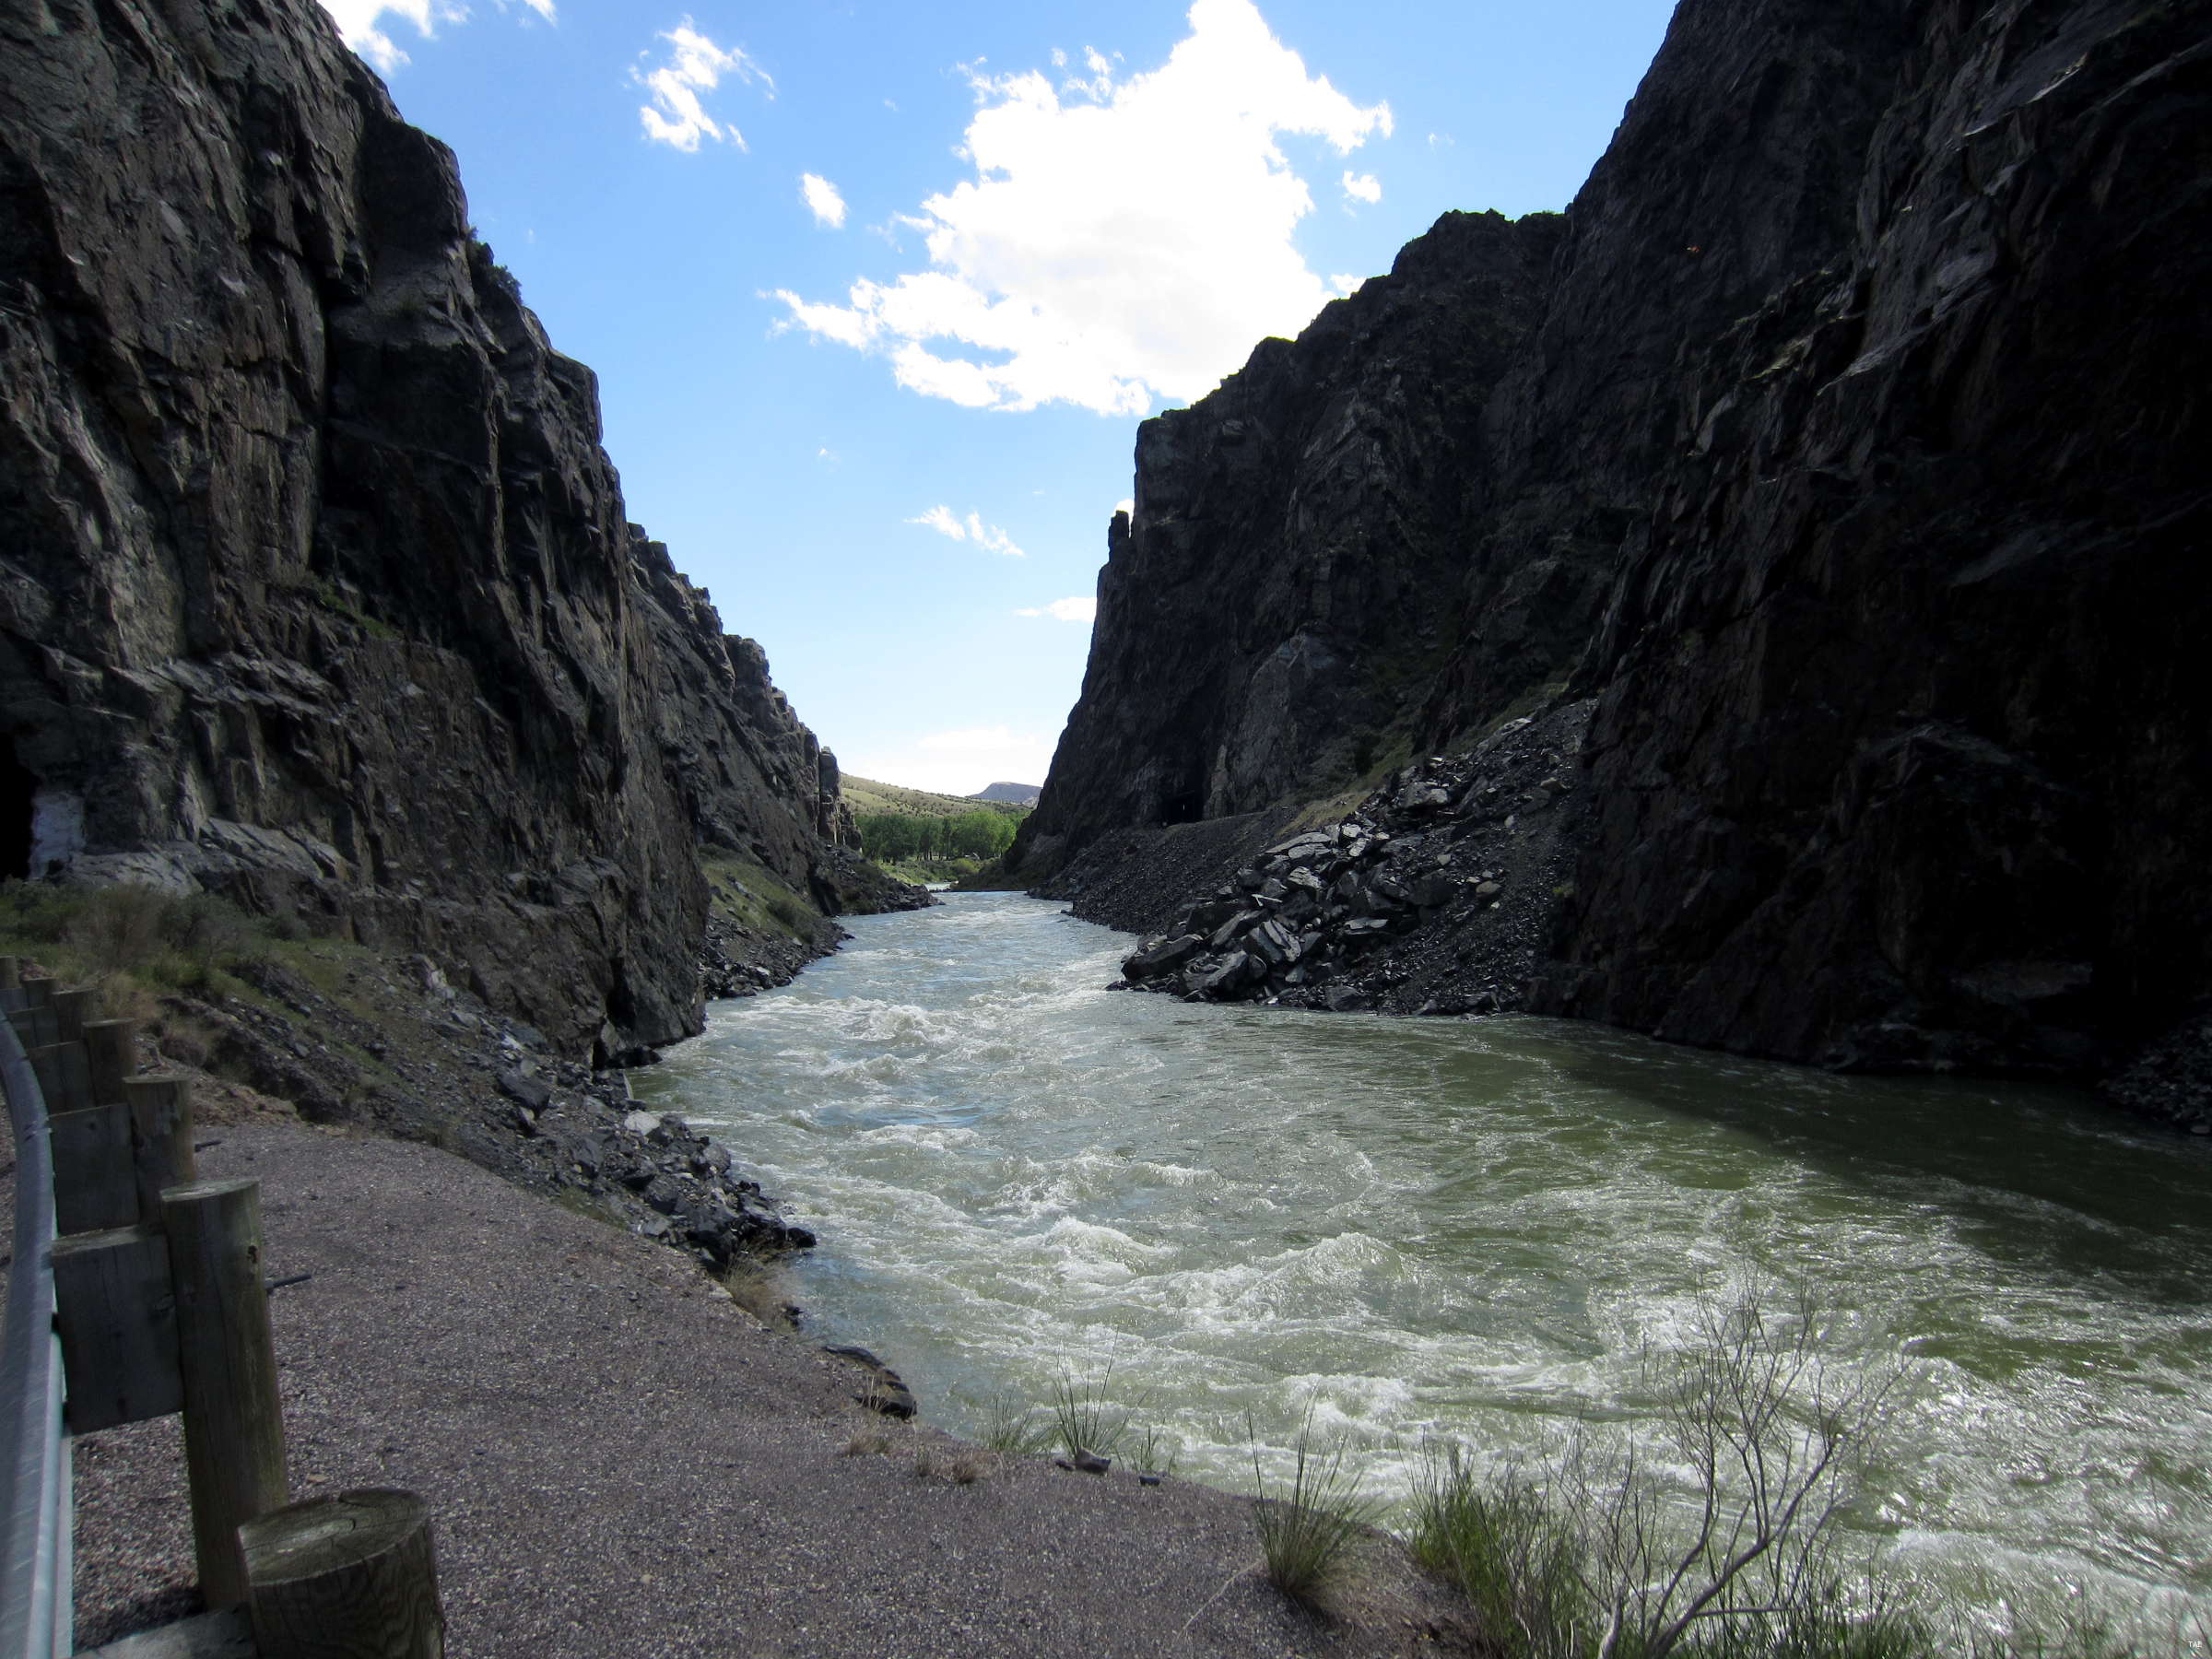 Wind River Canyon Scenic Byway | The Sights and Sites of America